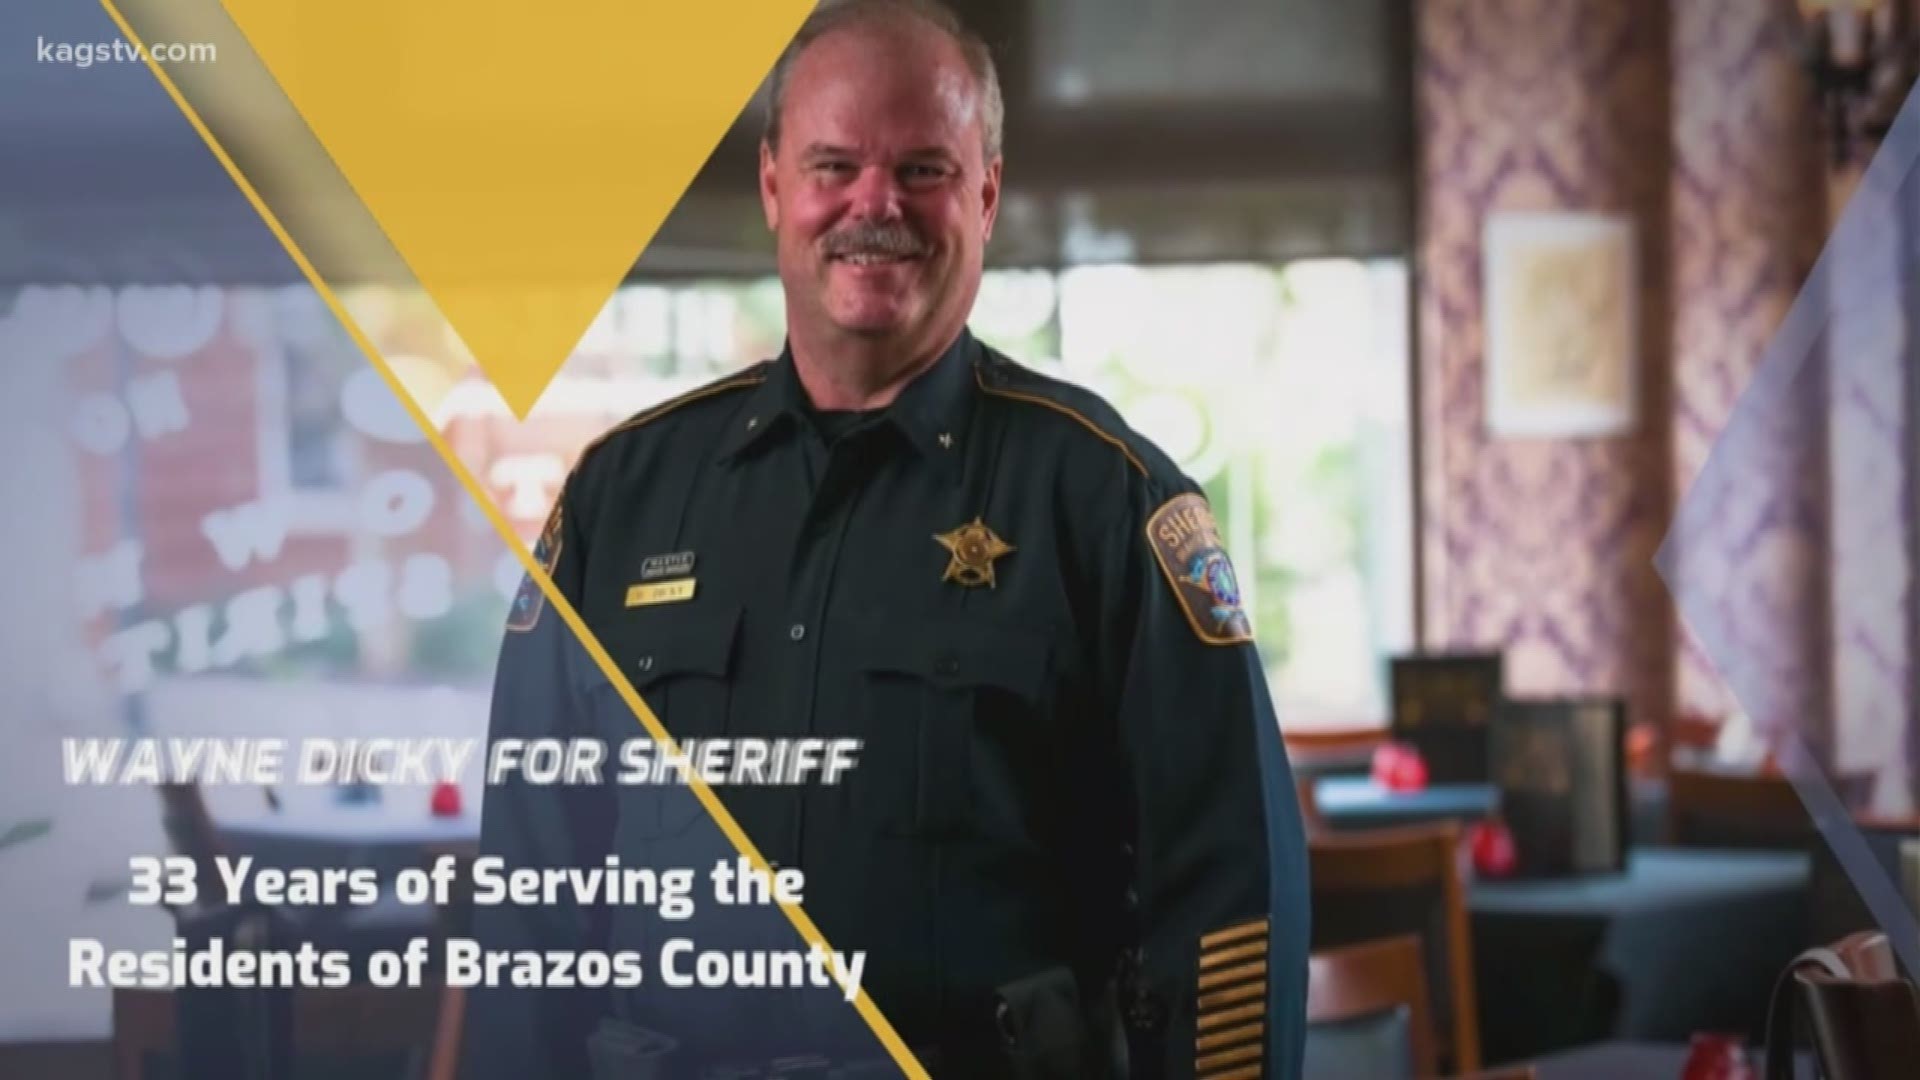 Wayne Dicky has been a Jail Administrator with the Brazos County Sheriff's Office for almost 34 years.